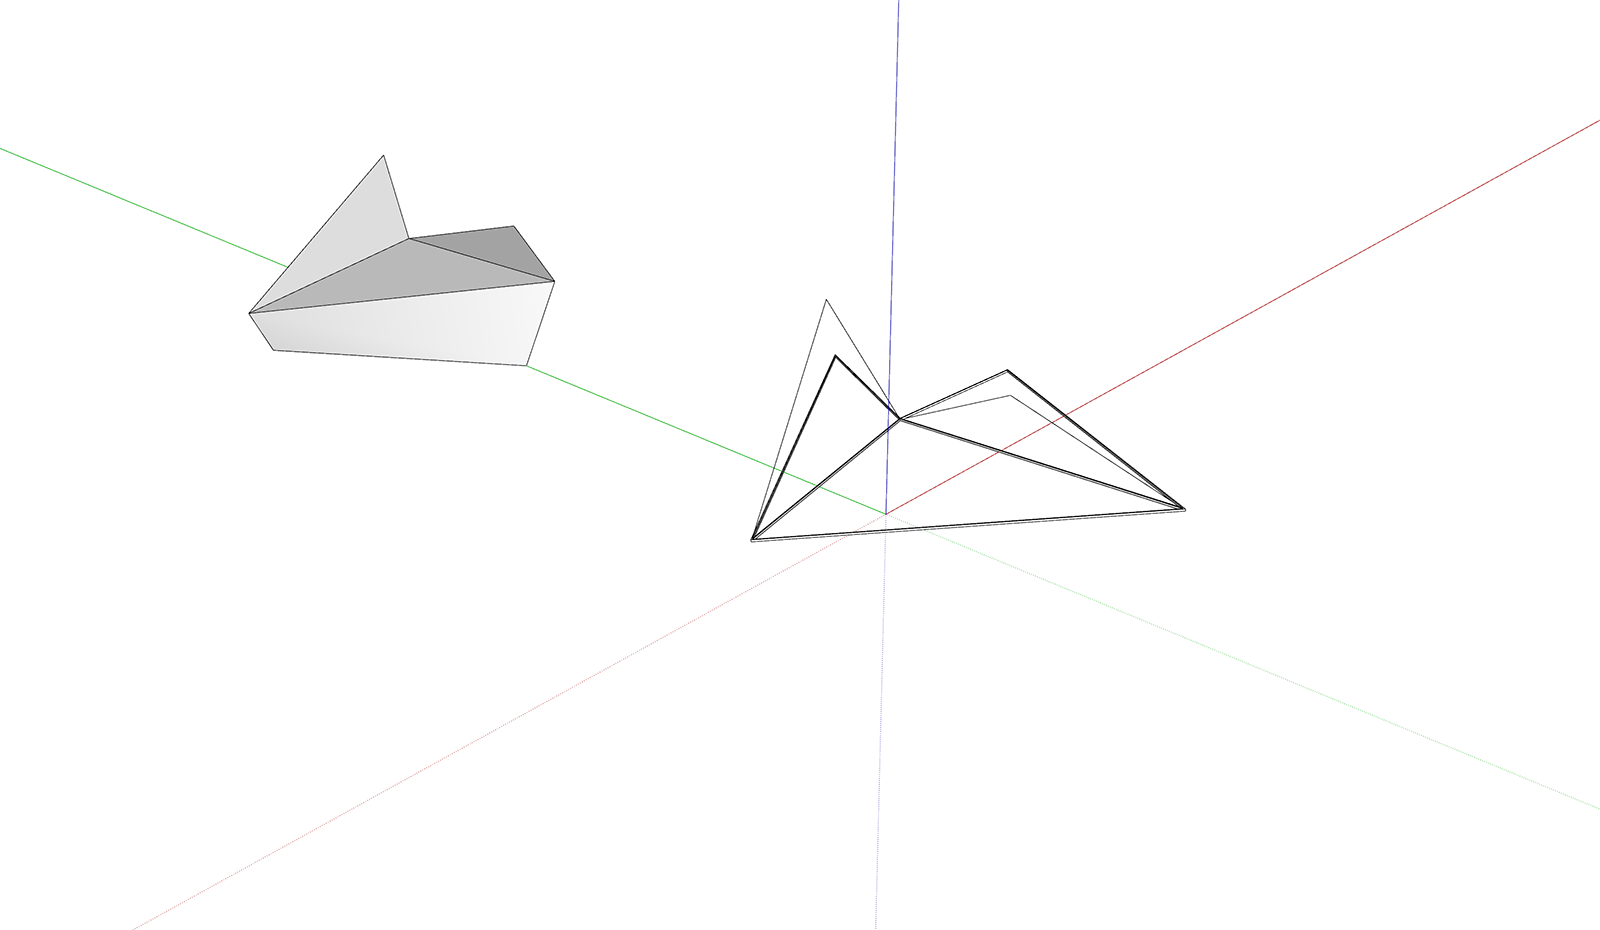 the resultant geometry from the various points in space using 1000 bit tools